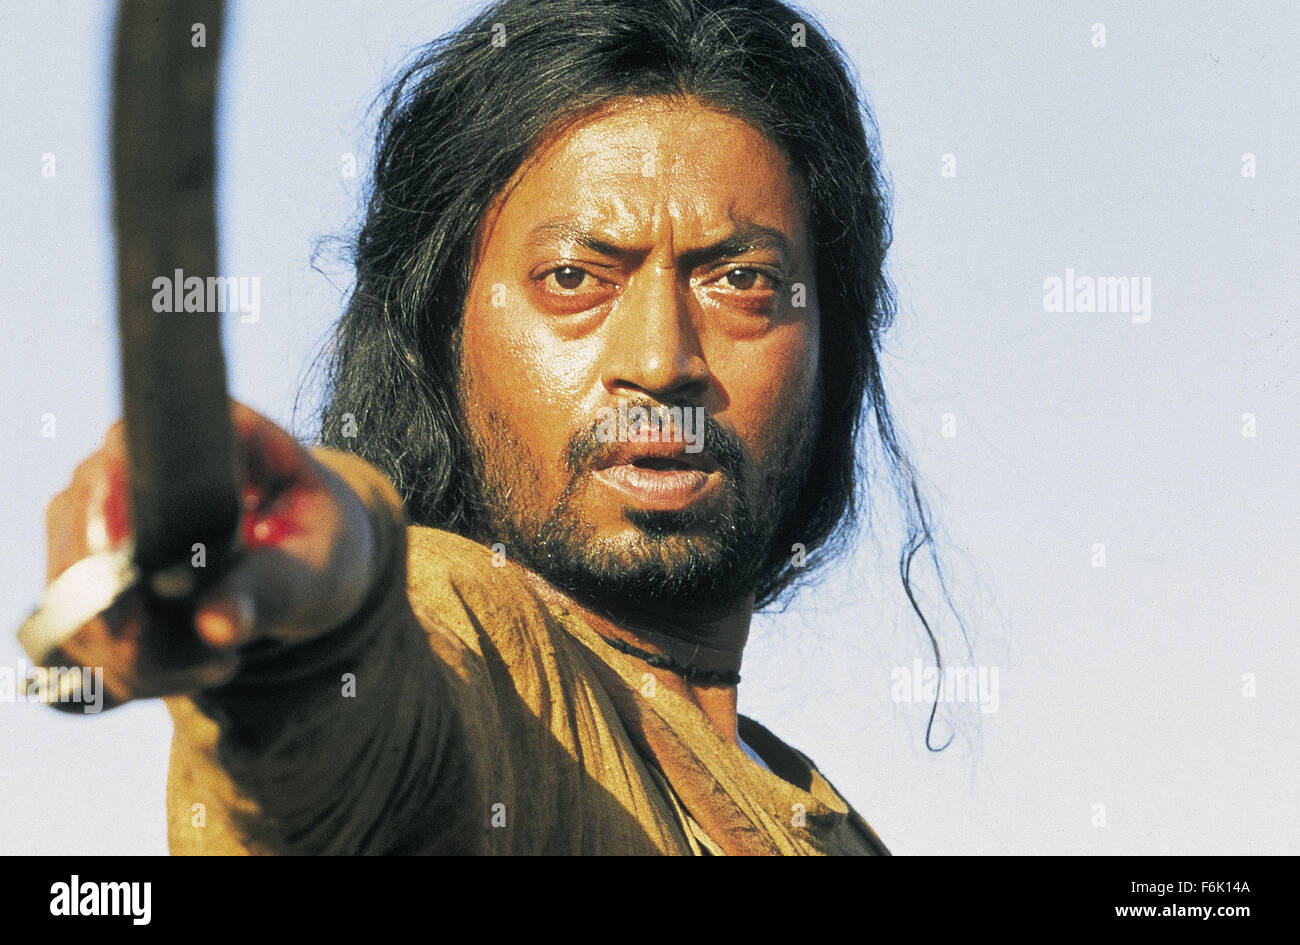 RELEASE DATE: July 15, 2005. MOVIE TITLE: The Warrior. STUDIO: Miramax Films. PLOT: In feudal India, a warrior (Khan) who renounces his role as the longitme enforcer to a local lord becomes the prey in a murderous hunt through the Himalayan mountains. PICTURED: IRFAN KHAN as Lafcadia. Stock Photo